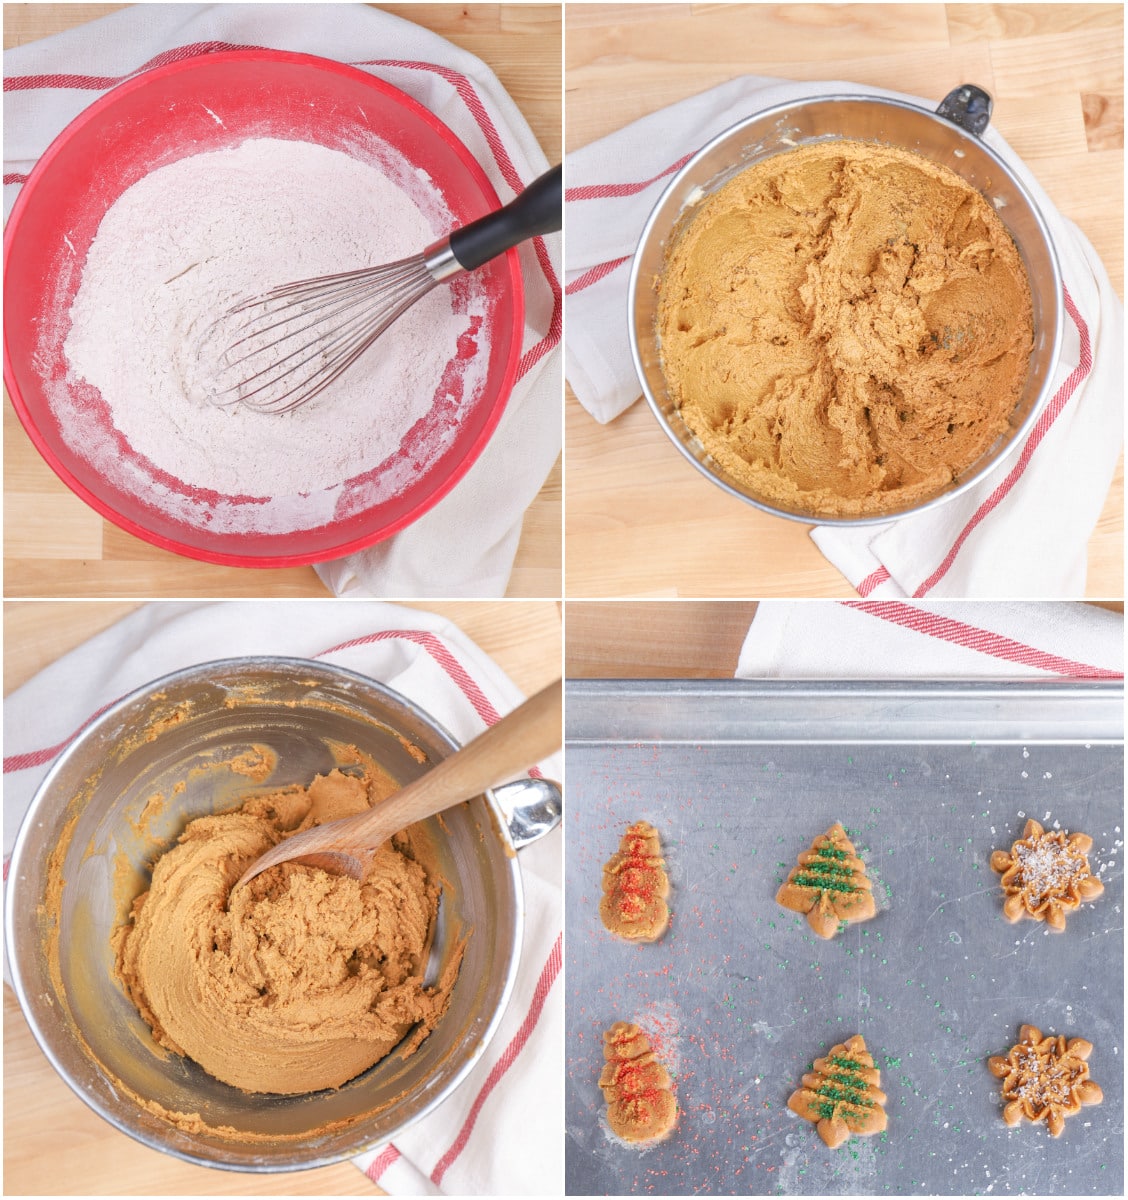 Steps to Make Gingerbread Spritz Cookies